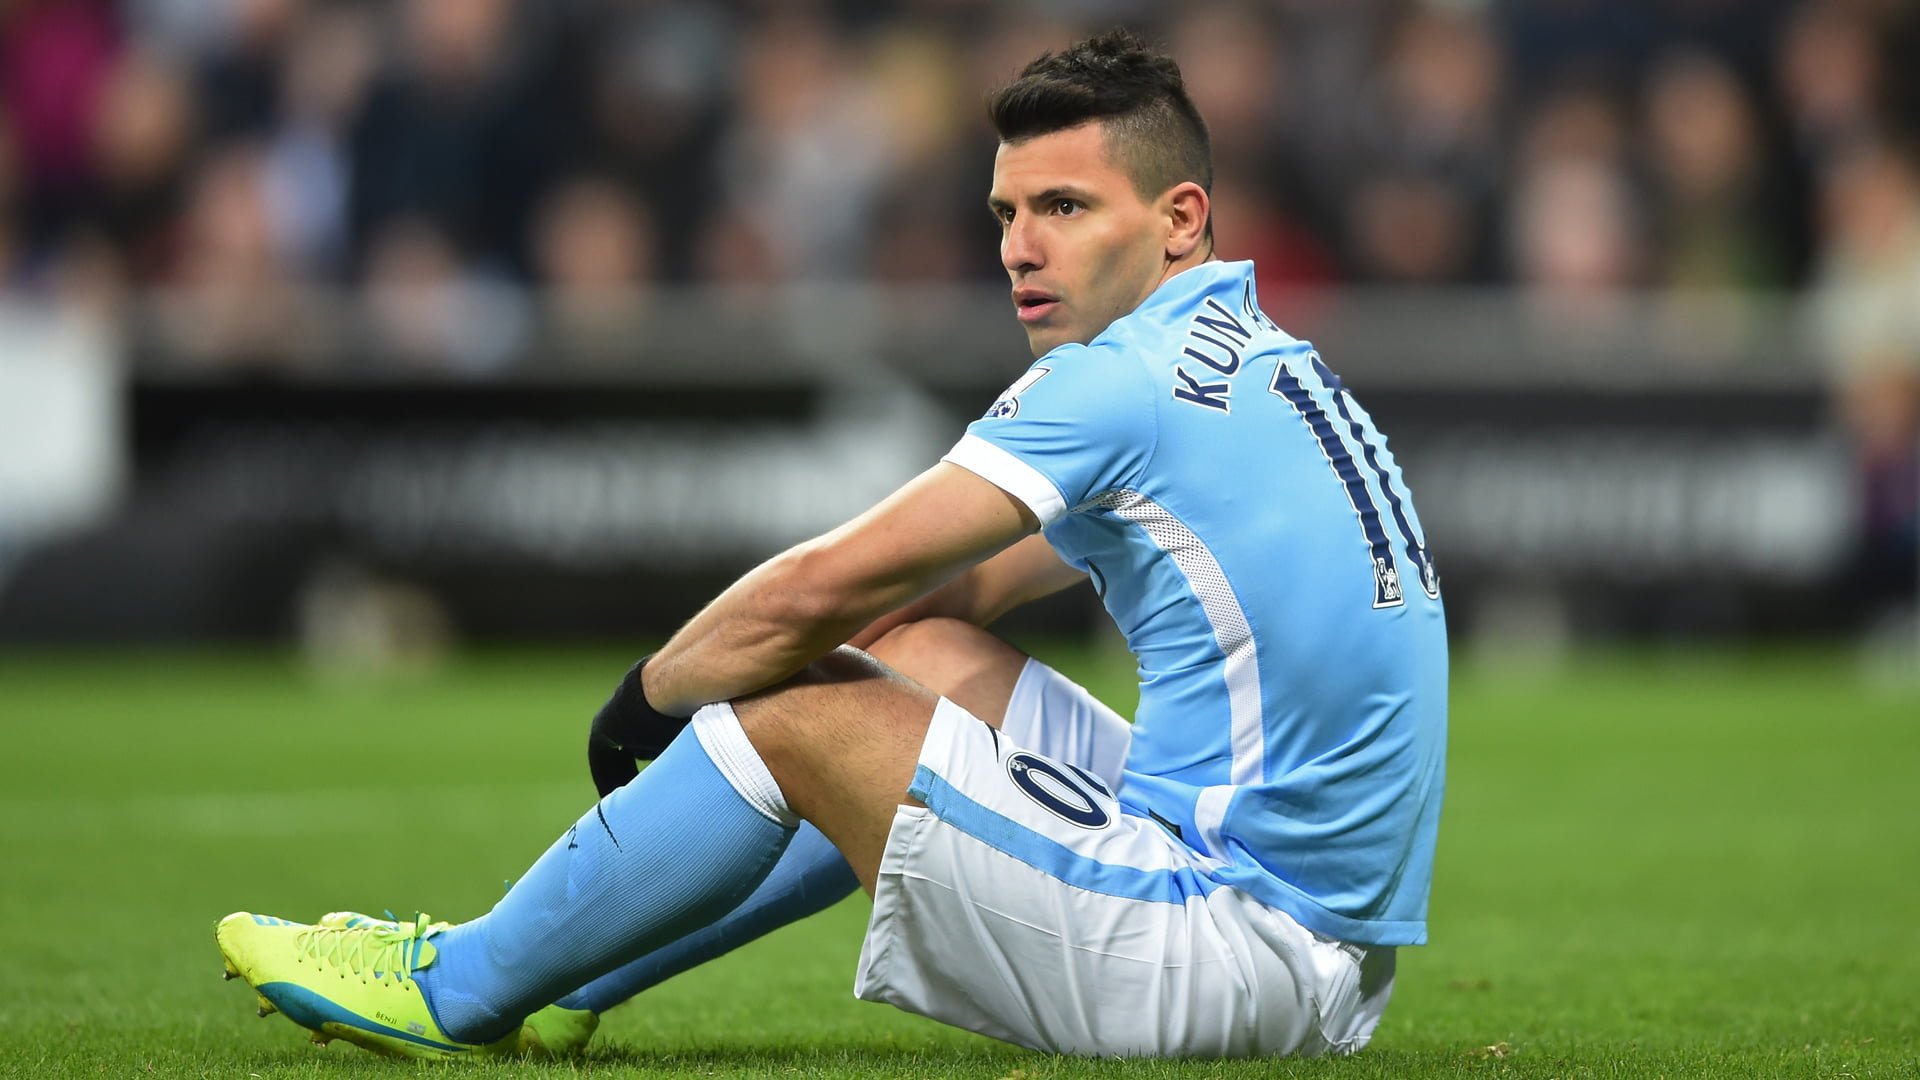 NEWCASTLE UPON TYNE, ENGLAND - APRIL 19:  Sergio Aguero of Manchester City reacts after a missed chance on goal during the Barclays Premier League match between Newcastle United and Manchester City at St James' Park on April 19, 2016 in Newcastle, England.  (Photo by Michael Regan/Getty Images)